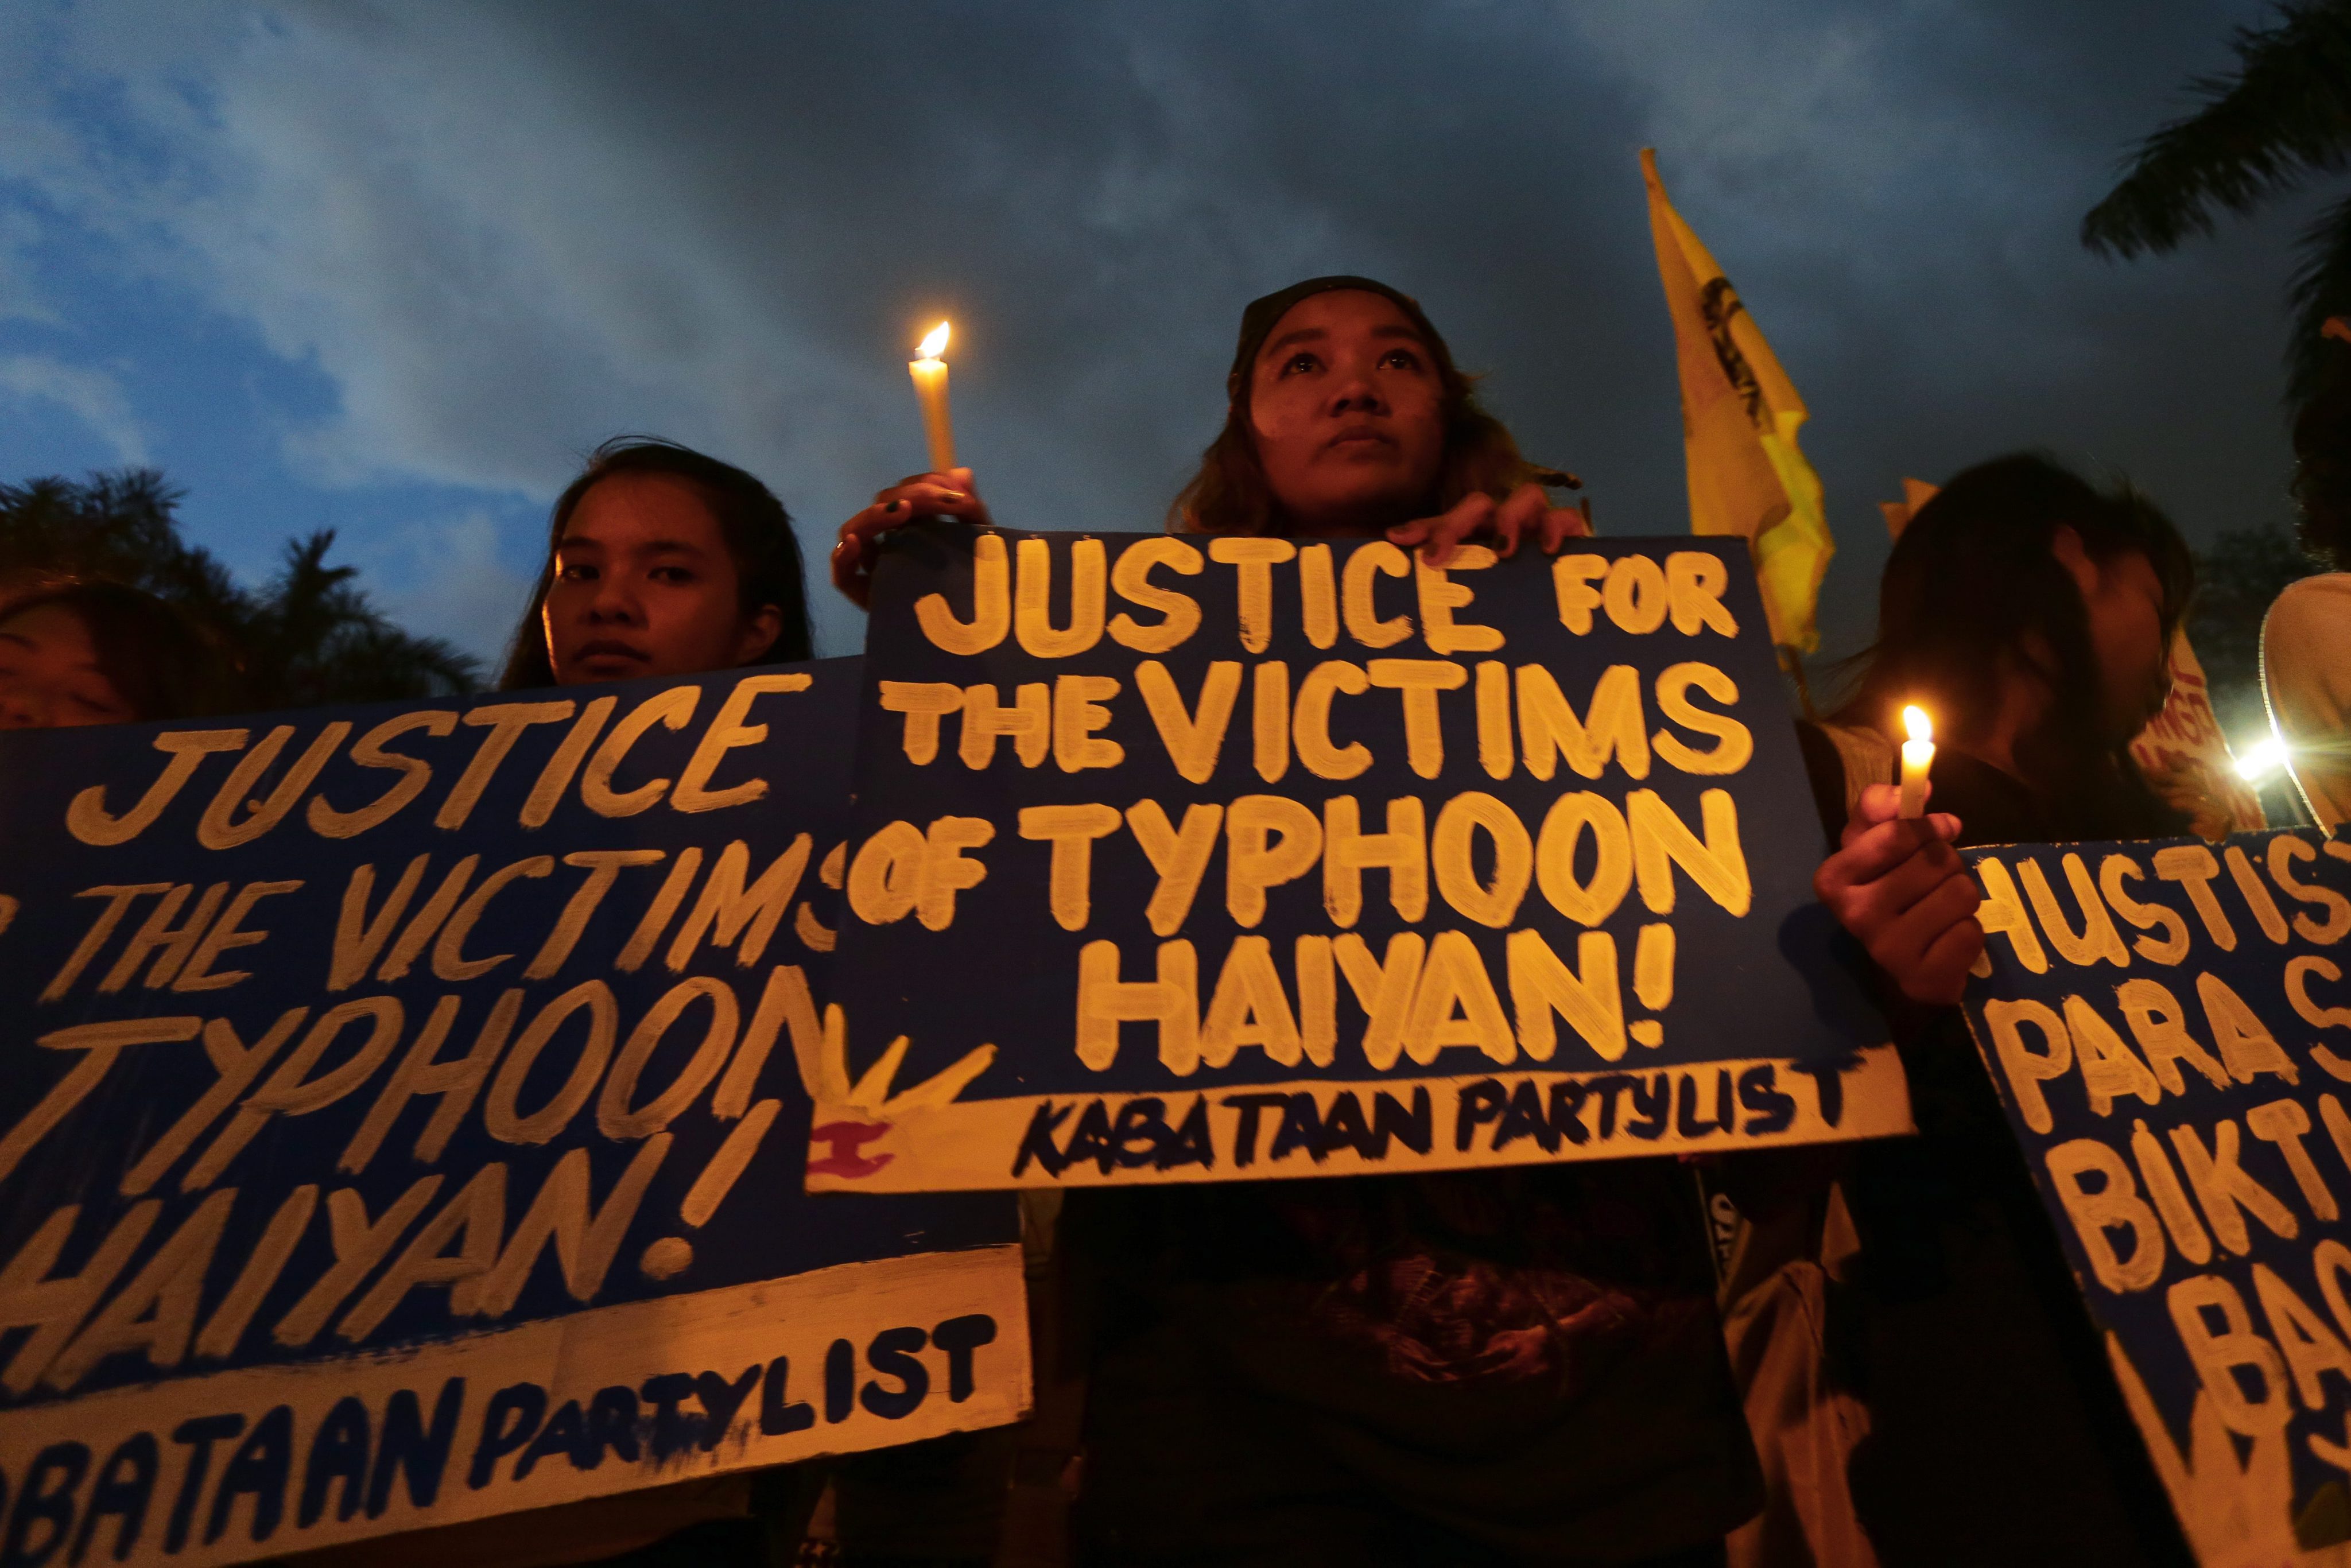 epa05015444 Filipino students hold a candle light vigil for the victims of typhoon Haiyan in Manila, Philippines, 07 November 2015. According to a press statement from the protesting youth group, the demonstration was held to denounce the Government’s protracted rehabilitation Haiyan hit the country November 2013, killing more than 6,300 people. Haiyan also displaced more than four million people wiping out entire villages in the central Philippines. EPA/MARK R. CRISTINO